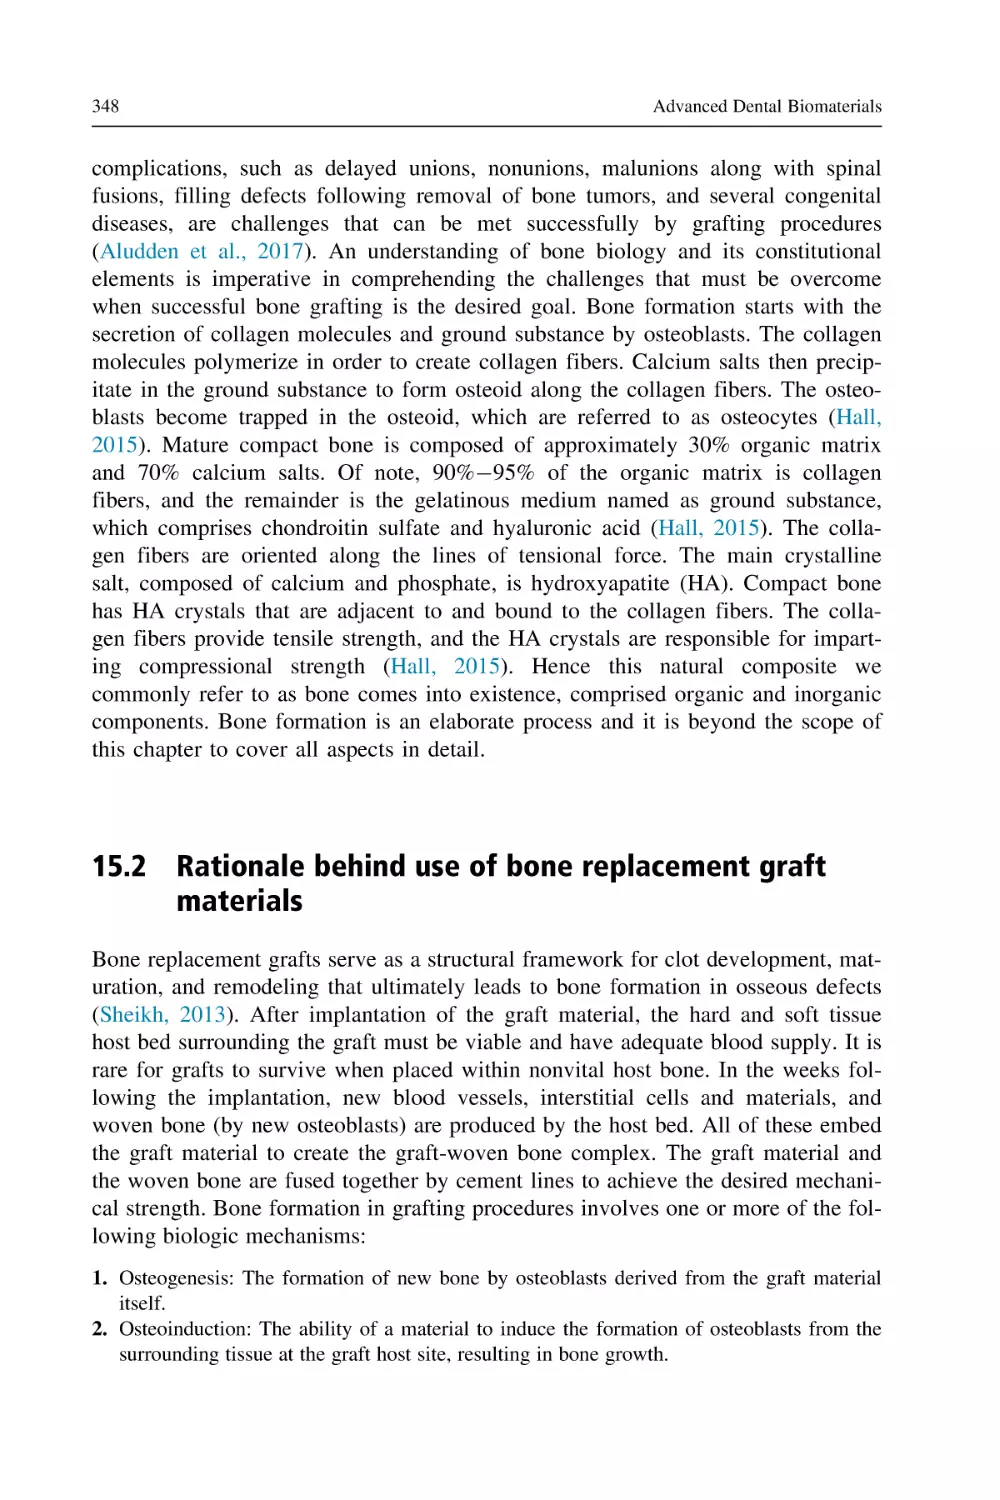 15.2 Rationale behind use of bone replacement graft materials